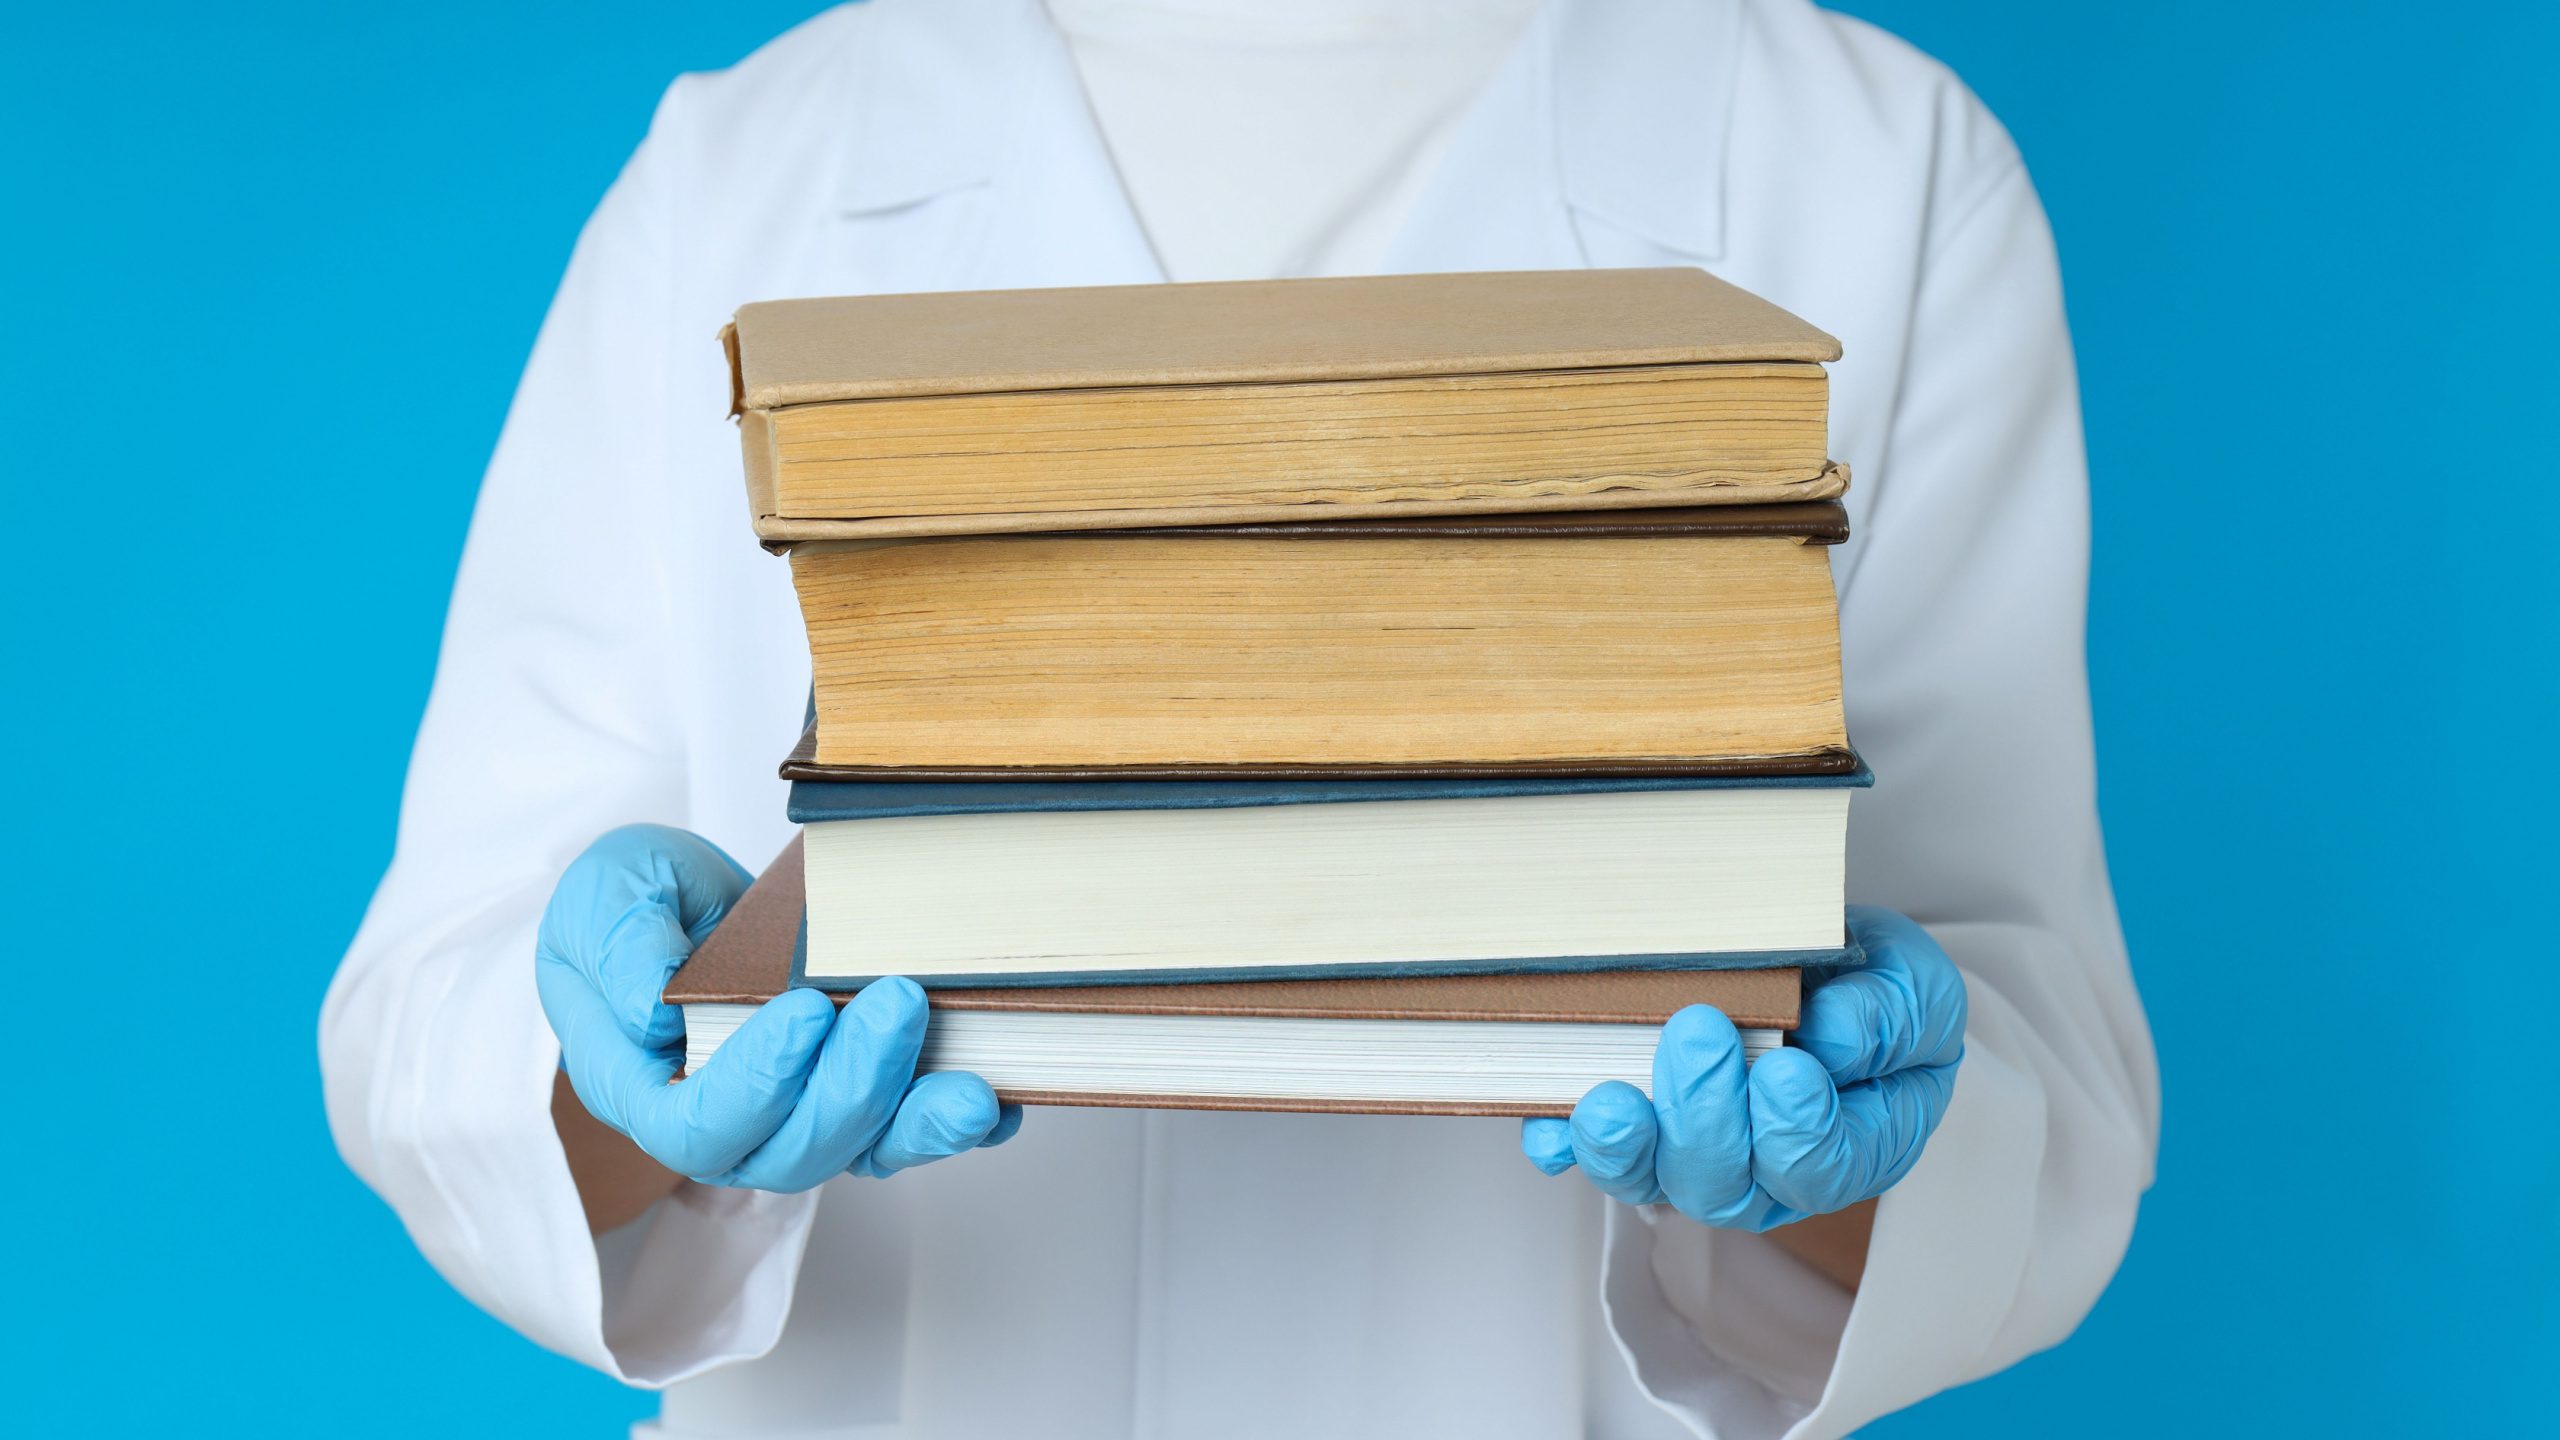 A doctor holding a stack of Step 2CK Biostatistics textbooks.